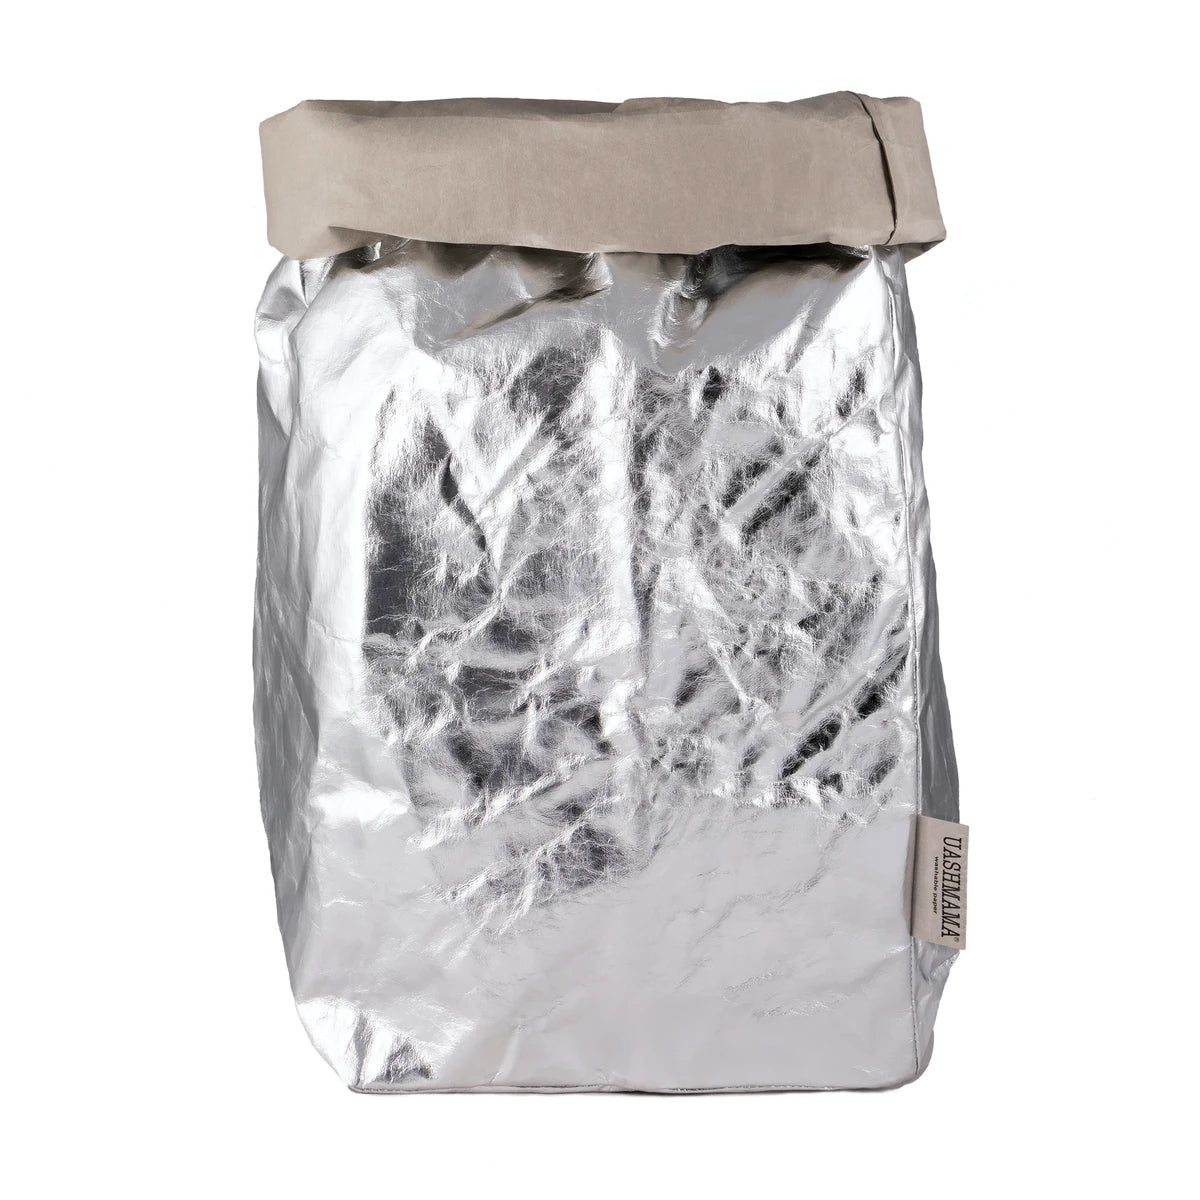 A washable paper bag is shown. The bag is rolled down at the top and features a UASHMAMA logo label on the bottom left corner. The bag pictured is the extra extra large size in metallic silver.